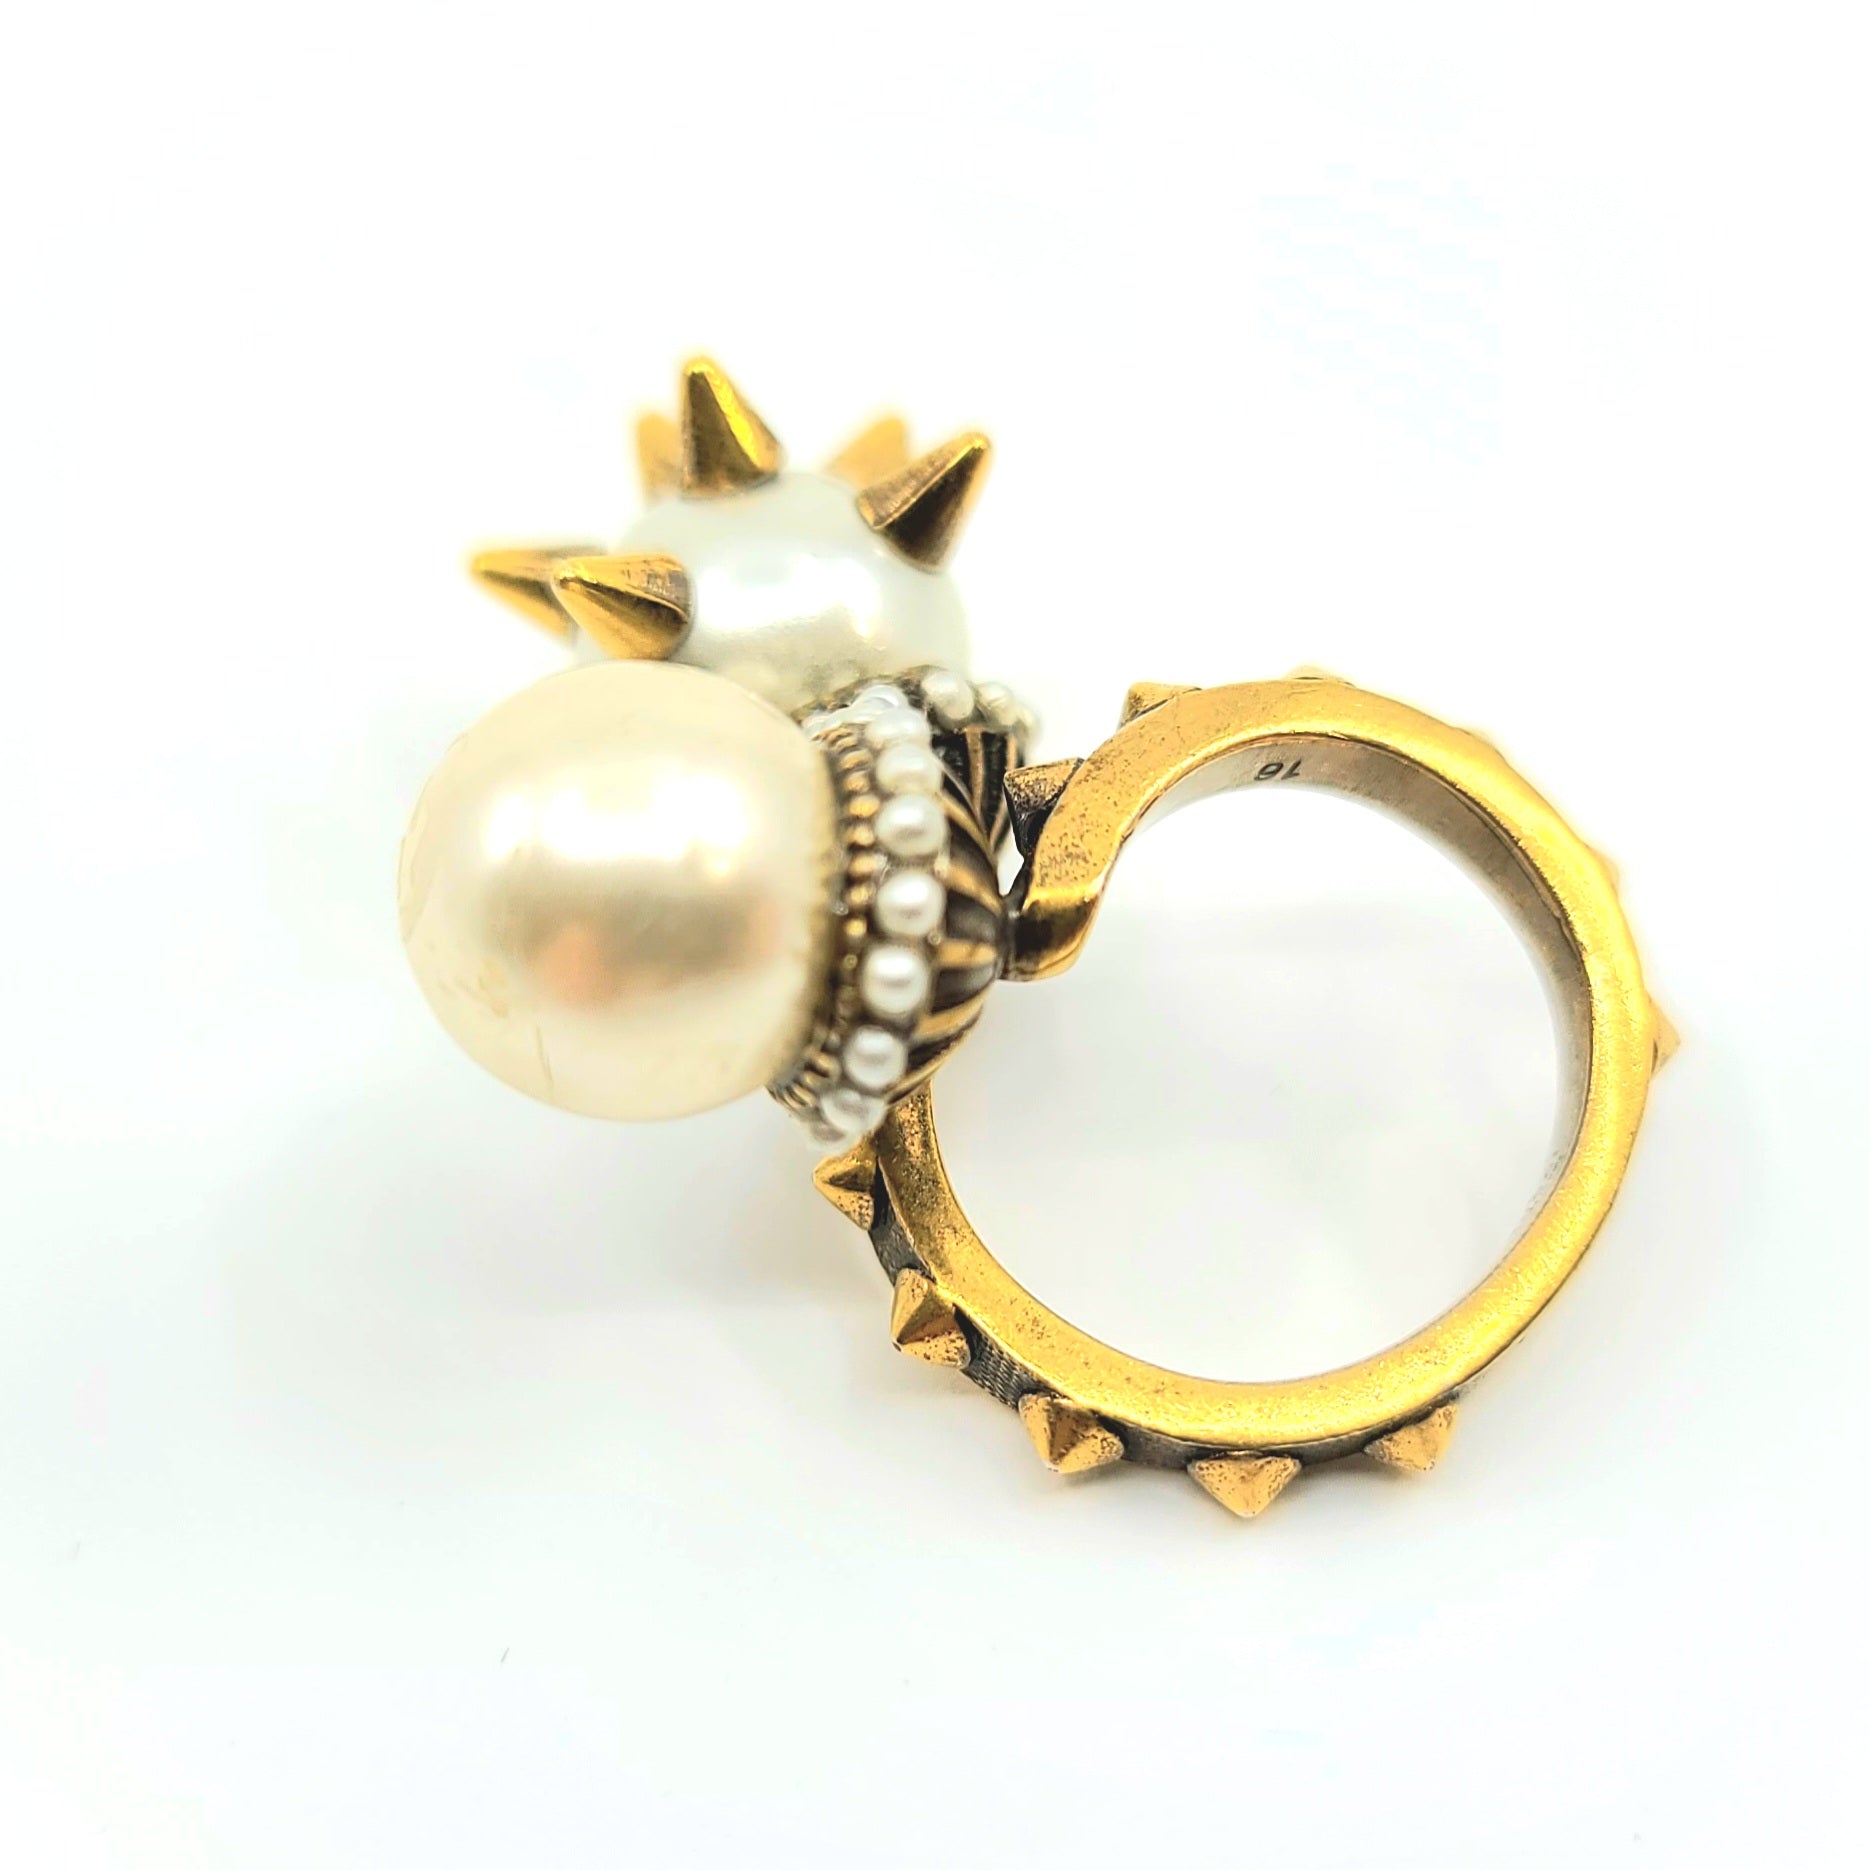 NEW GUCCI RING WITH DOUBLE GLASS PEARLS & SPIKES – 